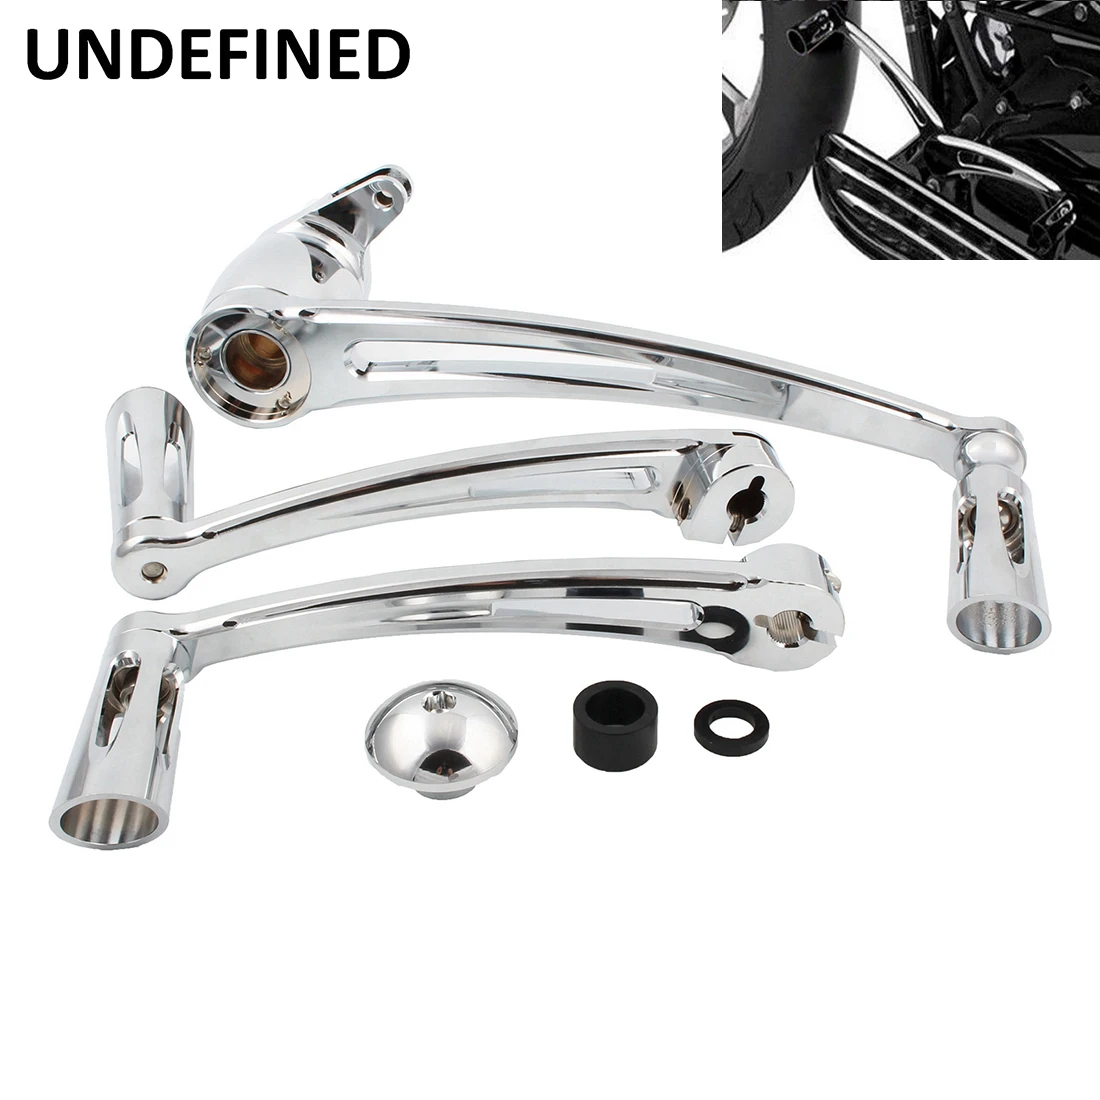 

Chrome Brake Arm Kit CNC Cut Shift Lever W/ Shifter Pegs for Harley Touring Road King Street Glide Electra Glide Trike 2014-2021